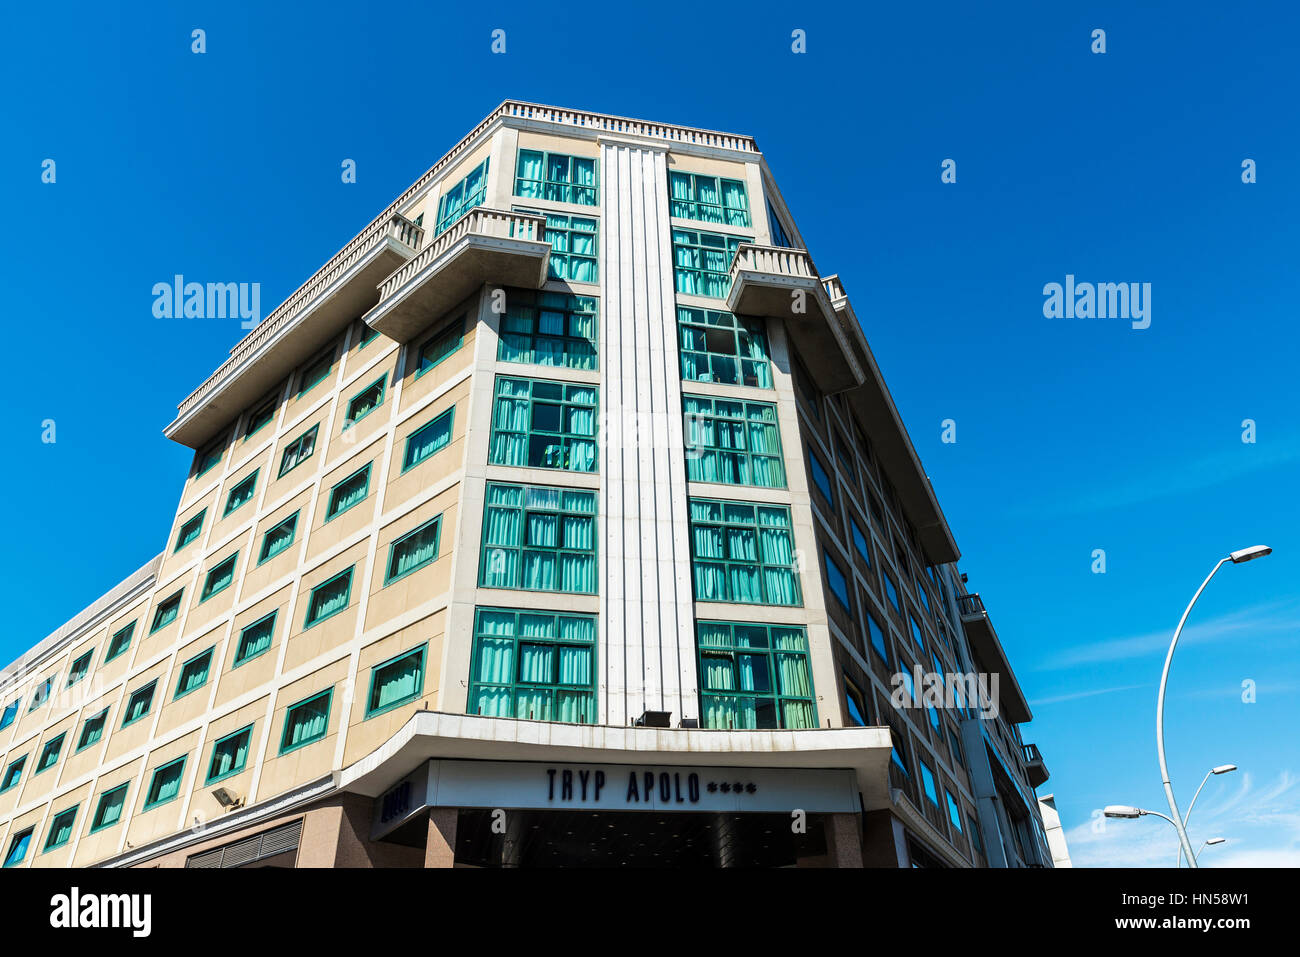 Barcelona, Spain - June 21, 2016: Tryp Apolo hotel located on Paralelo Avenue Stock Photo